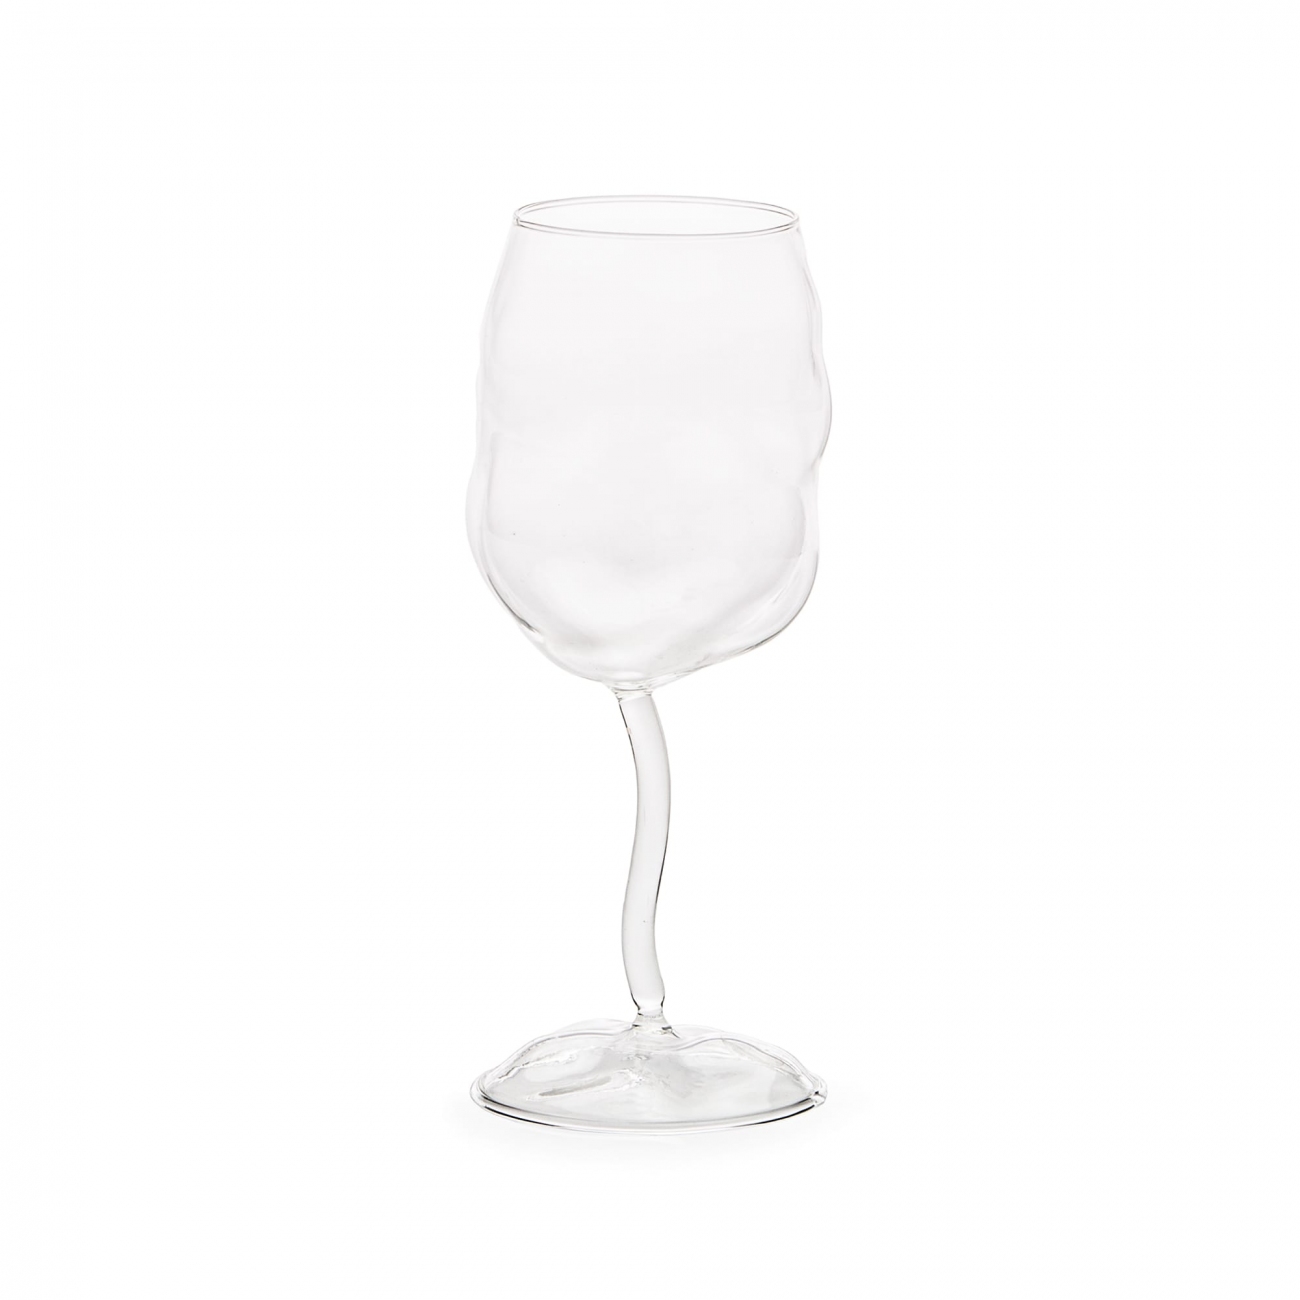 SELETTI GLASS FROM SONNY GLASS